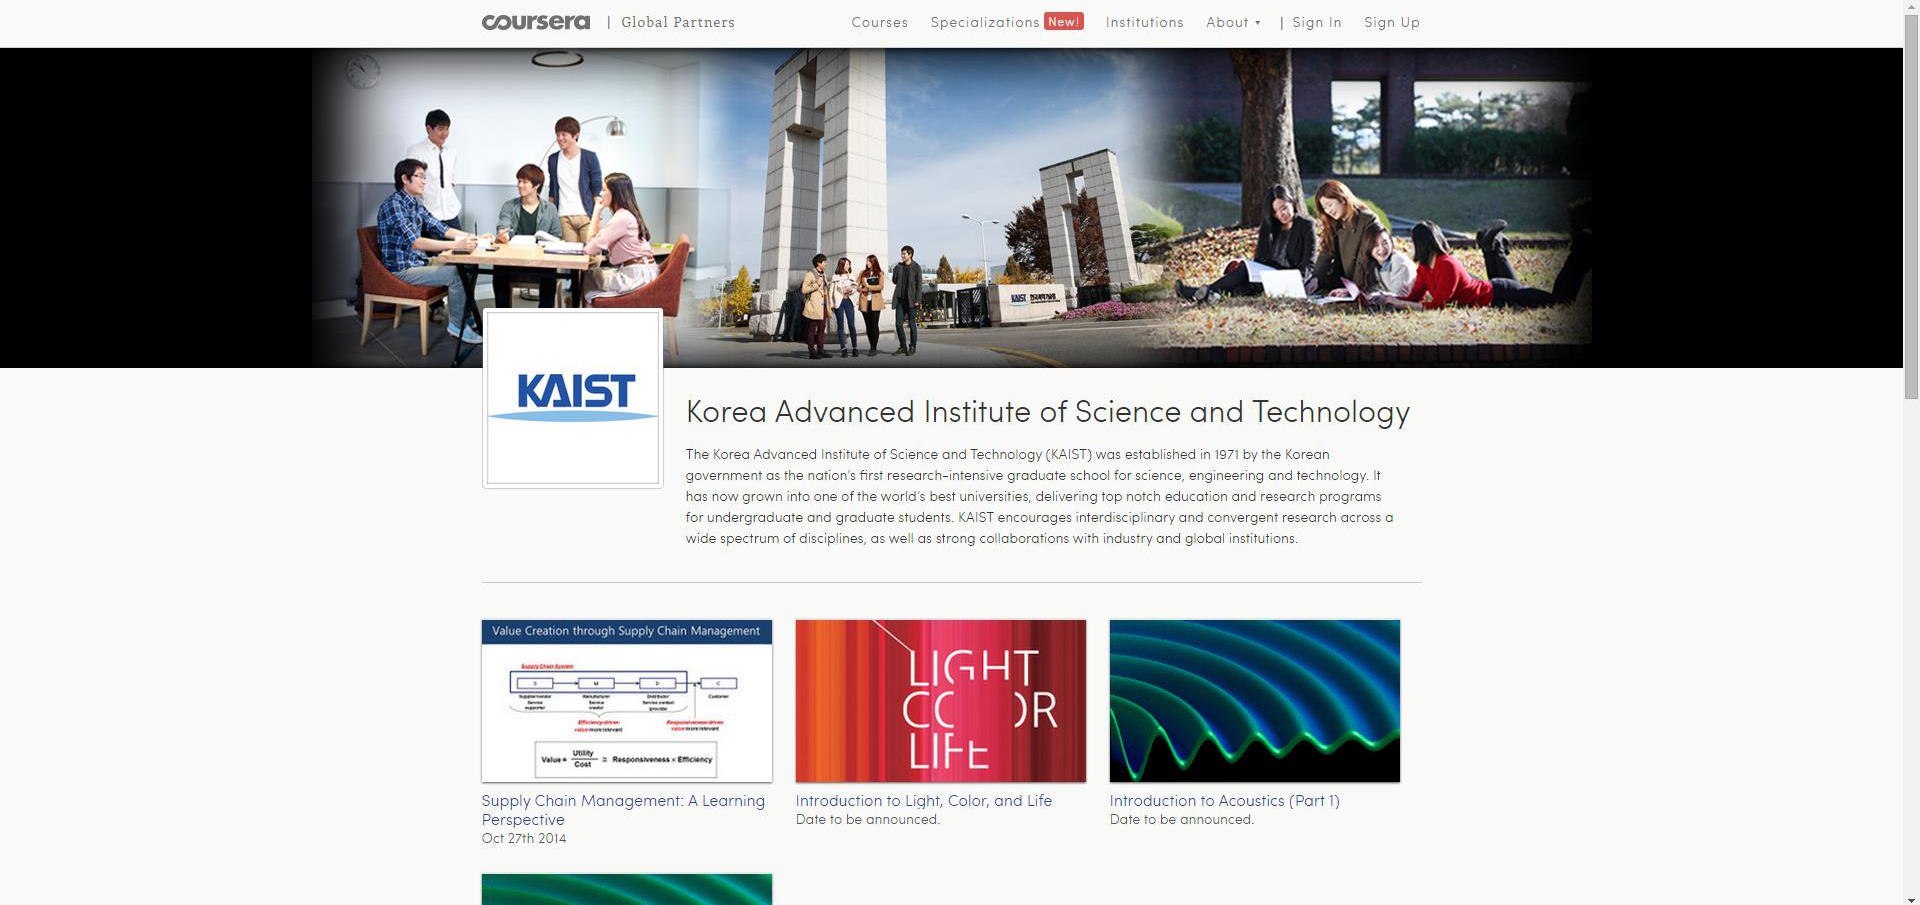 KAIST-Coursera Offers a Course Entitled 